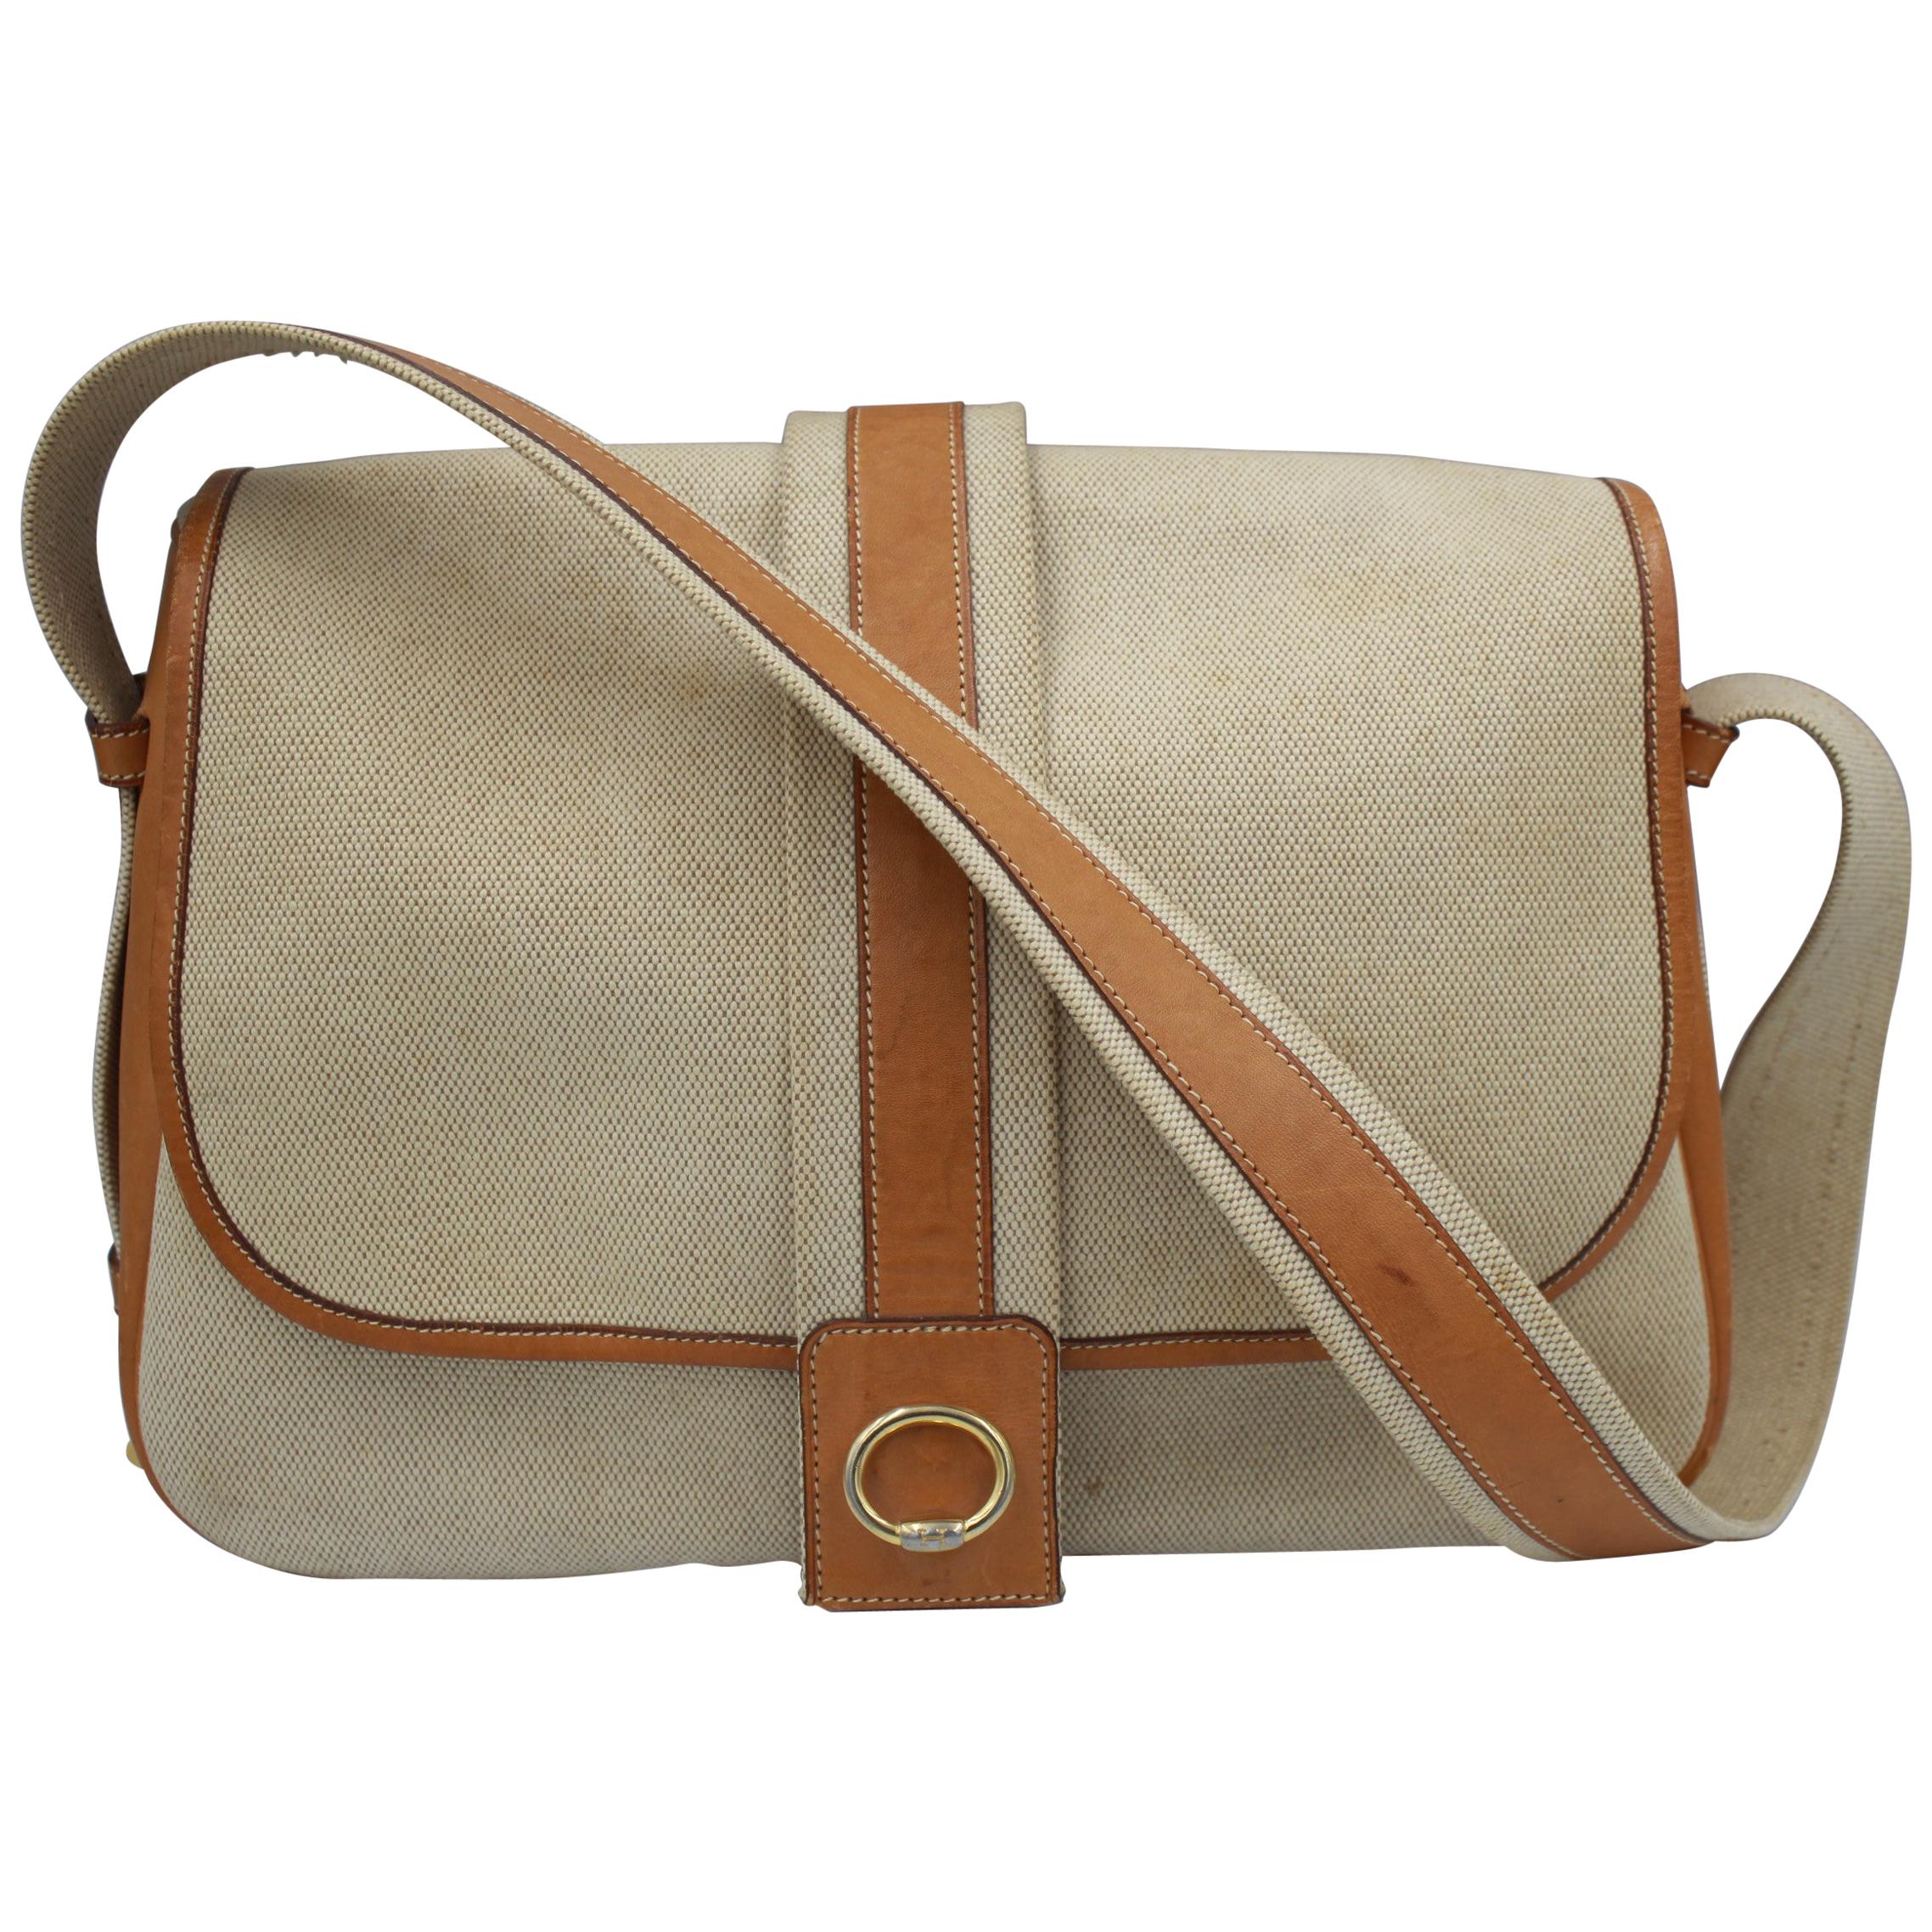 Vintage Hermes Noumea Messeger Bag in Leather and Canvas